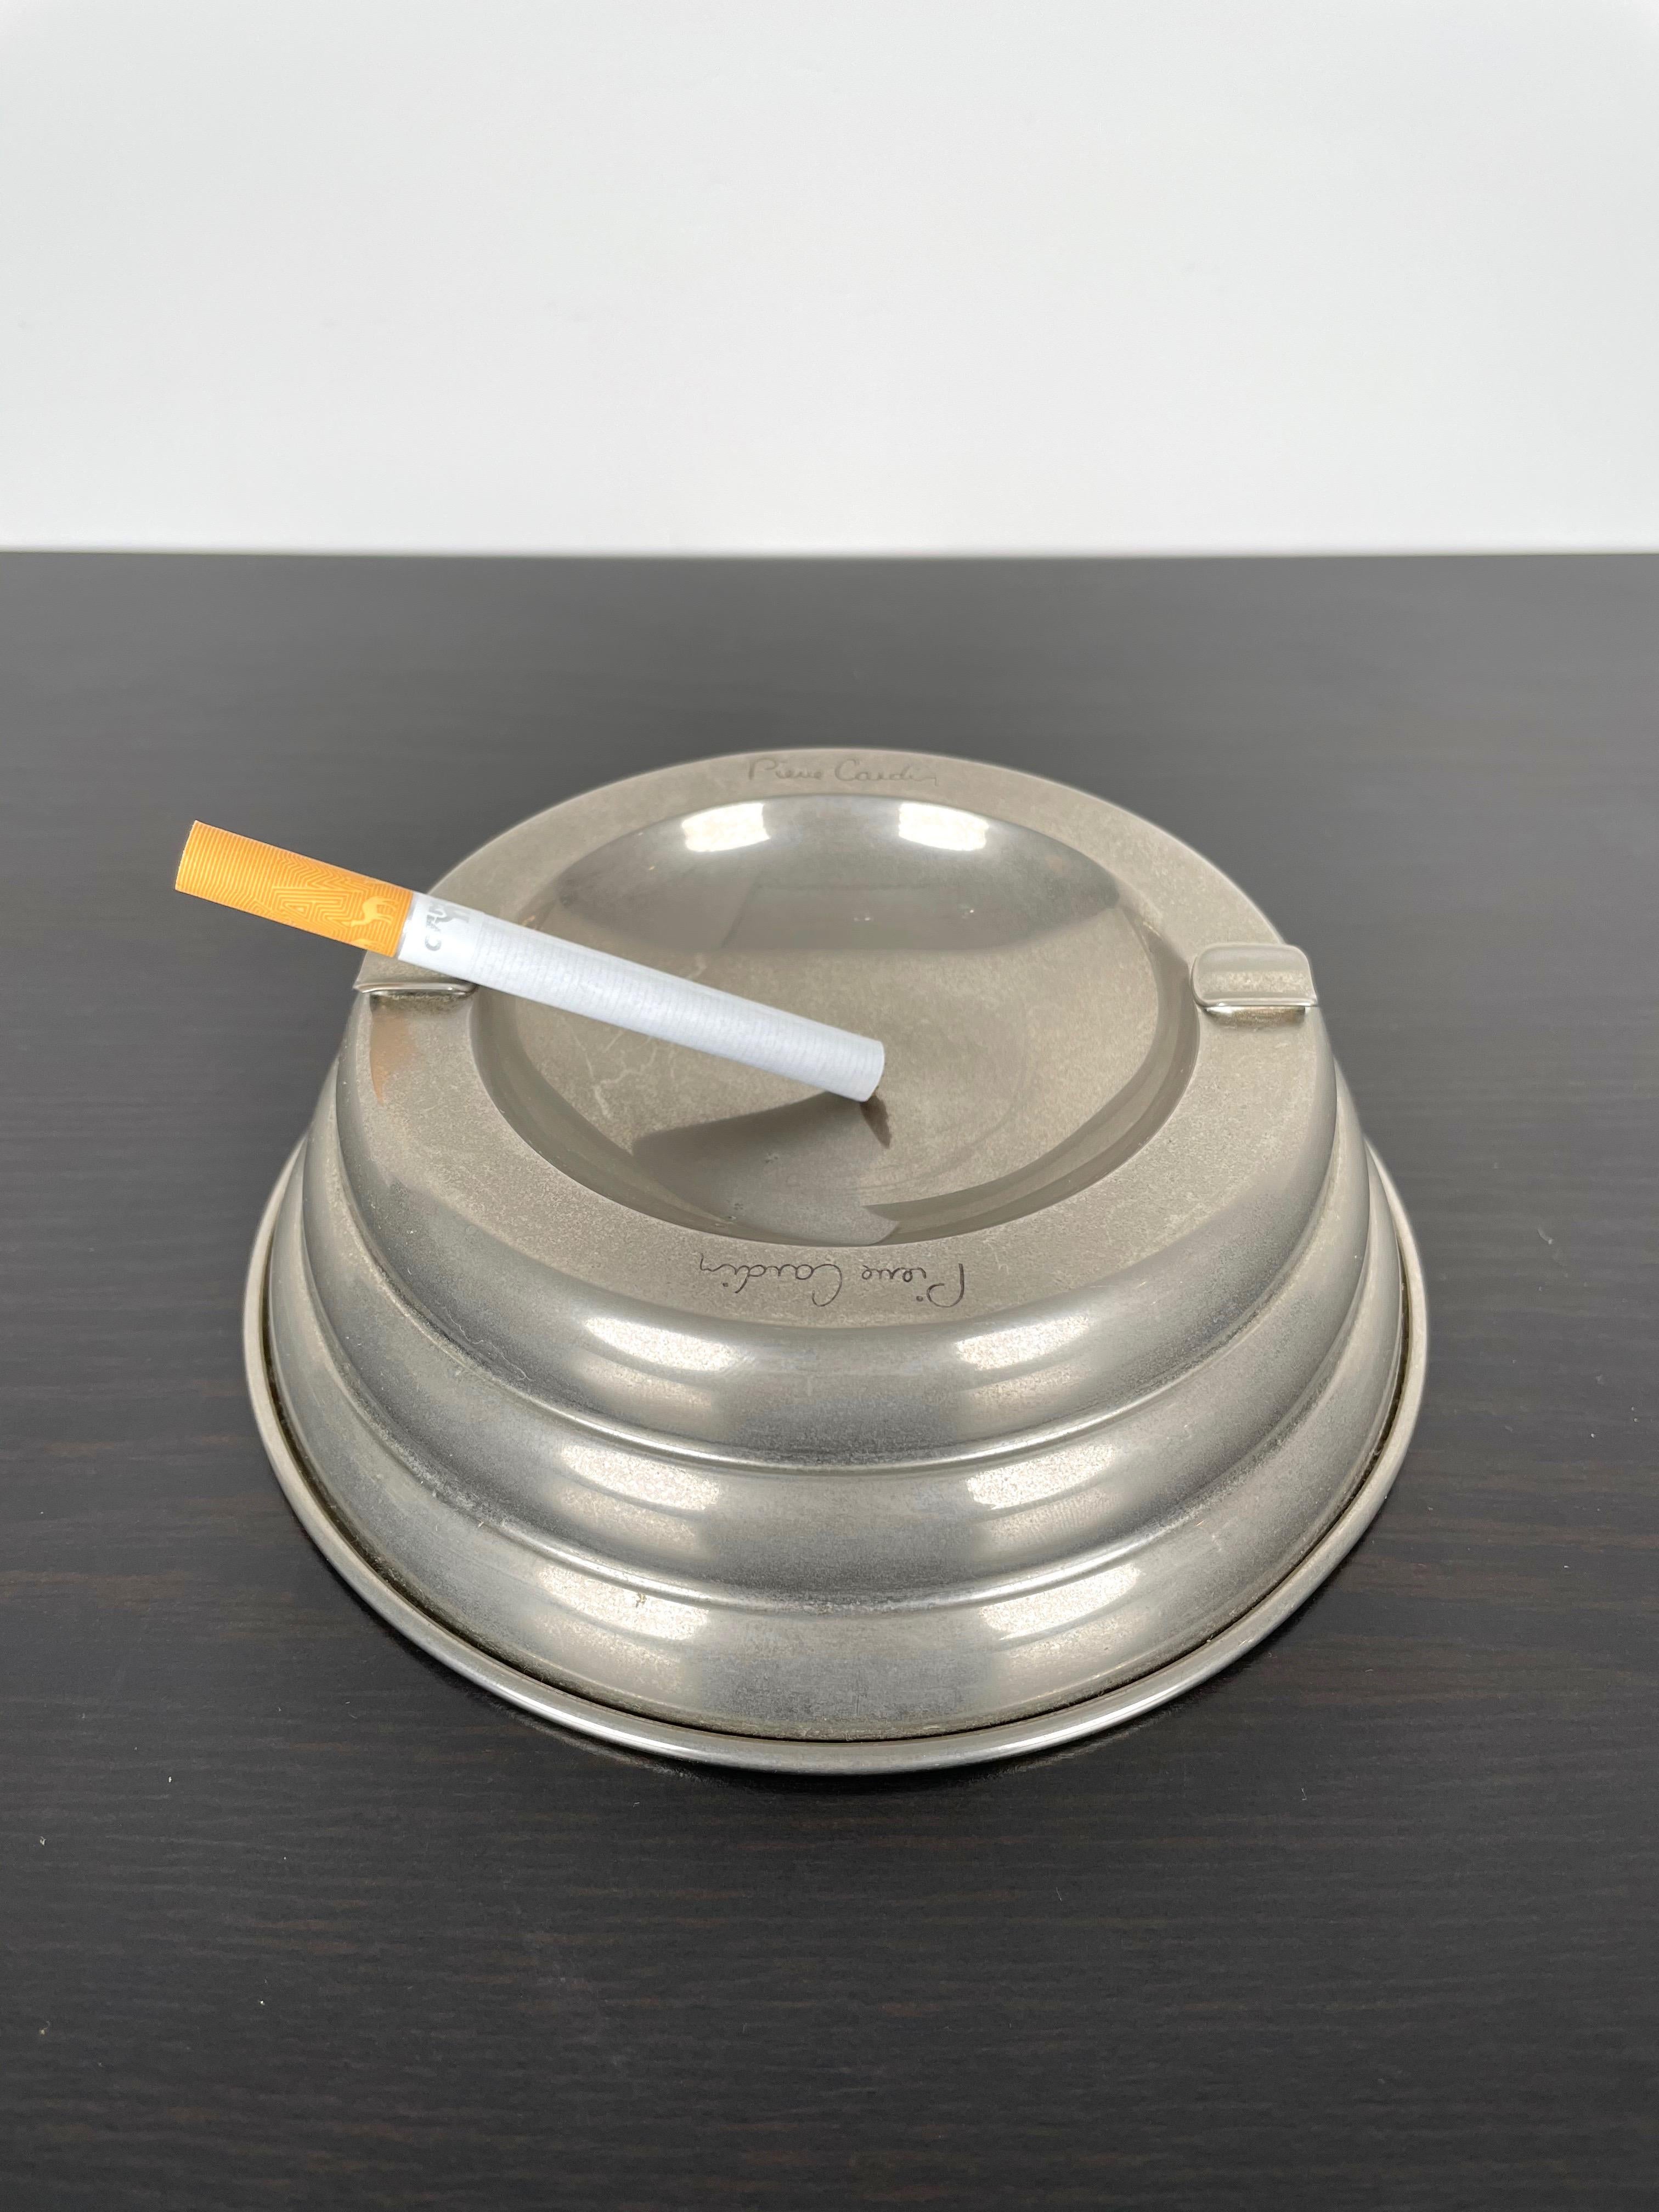 Mid-Century Modern Pierre Cardin Tobacco Table Set of Lighter and Ashtray, Paris, 1970s For Sale